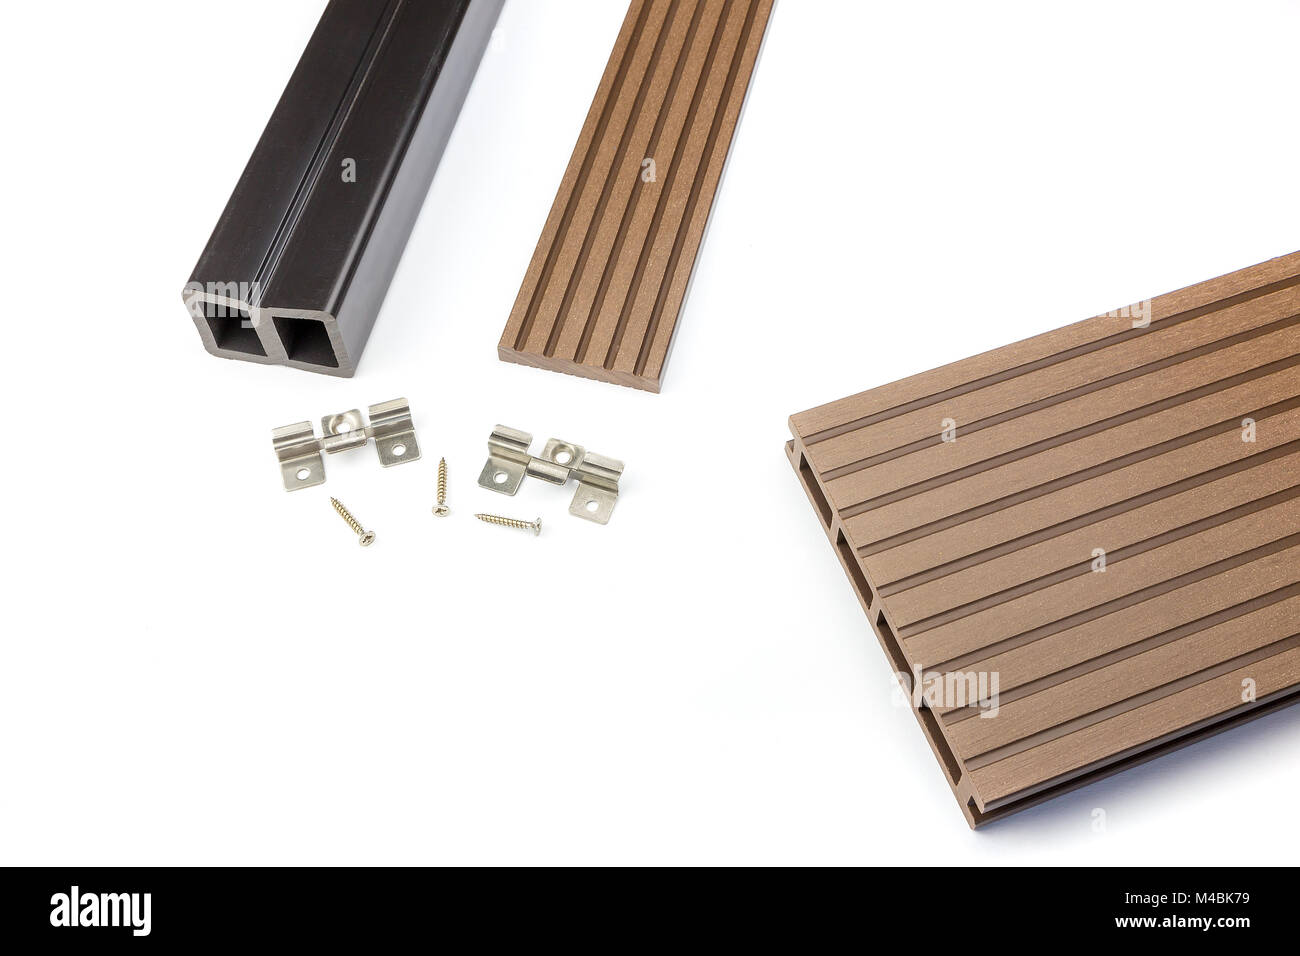 Brown composite decking board with mounting material Stock Photo